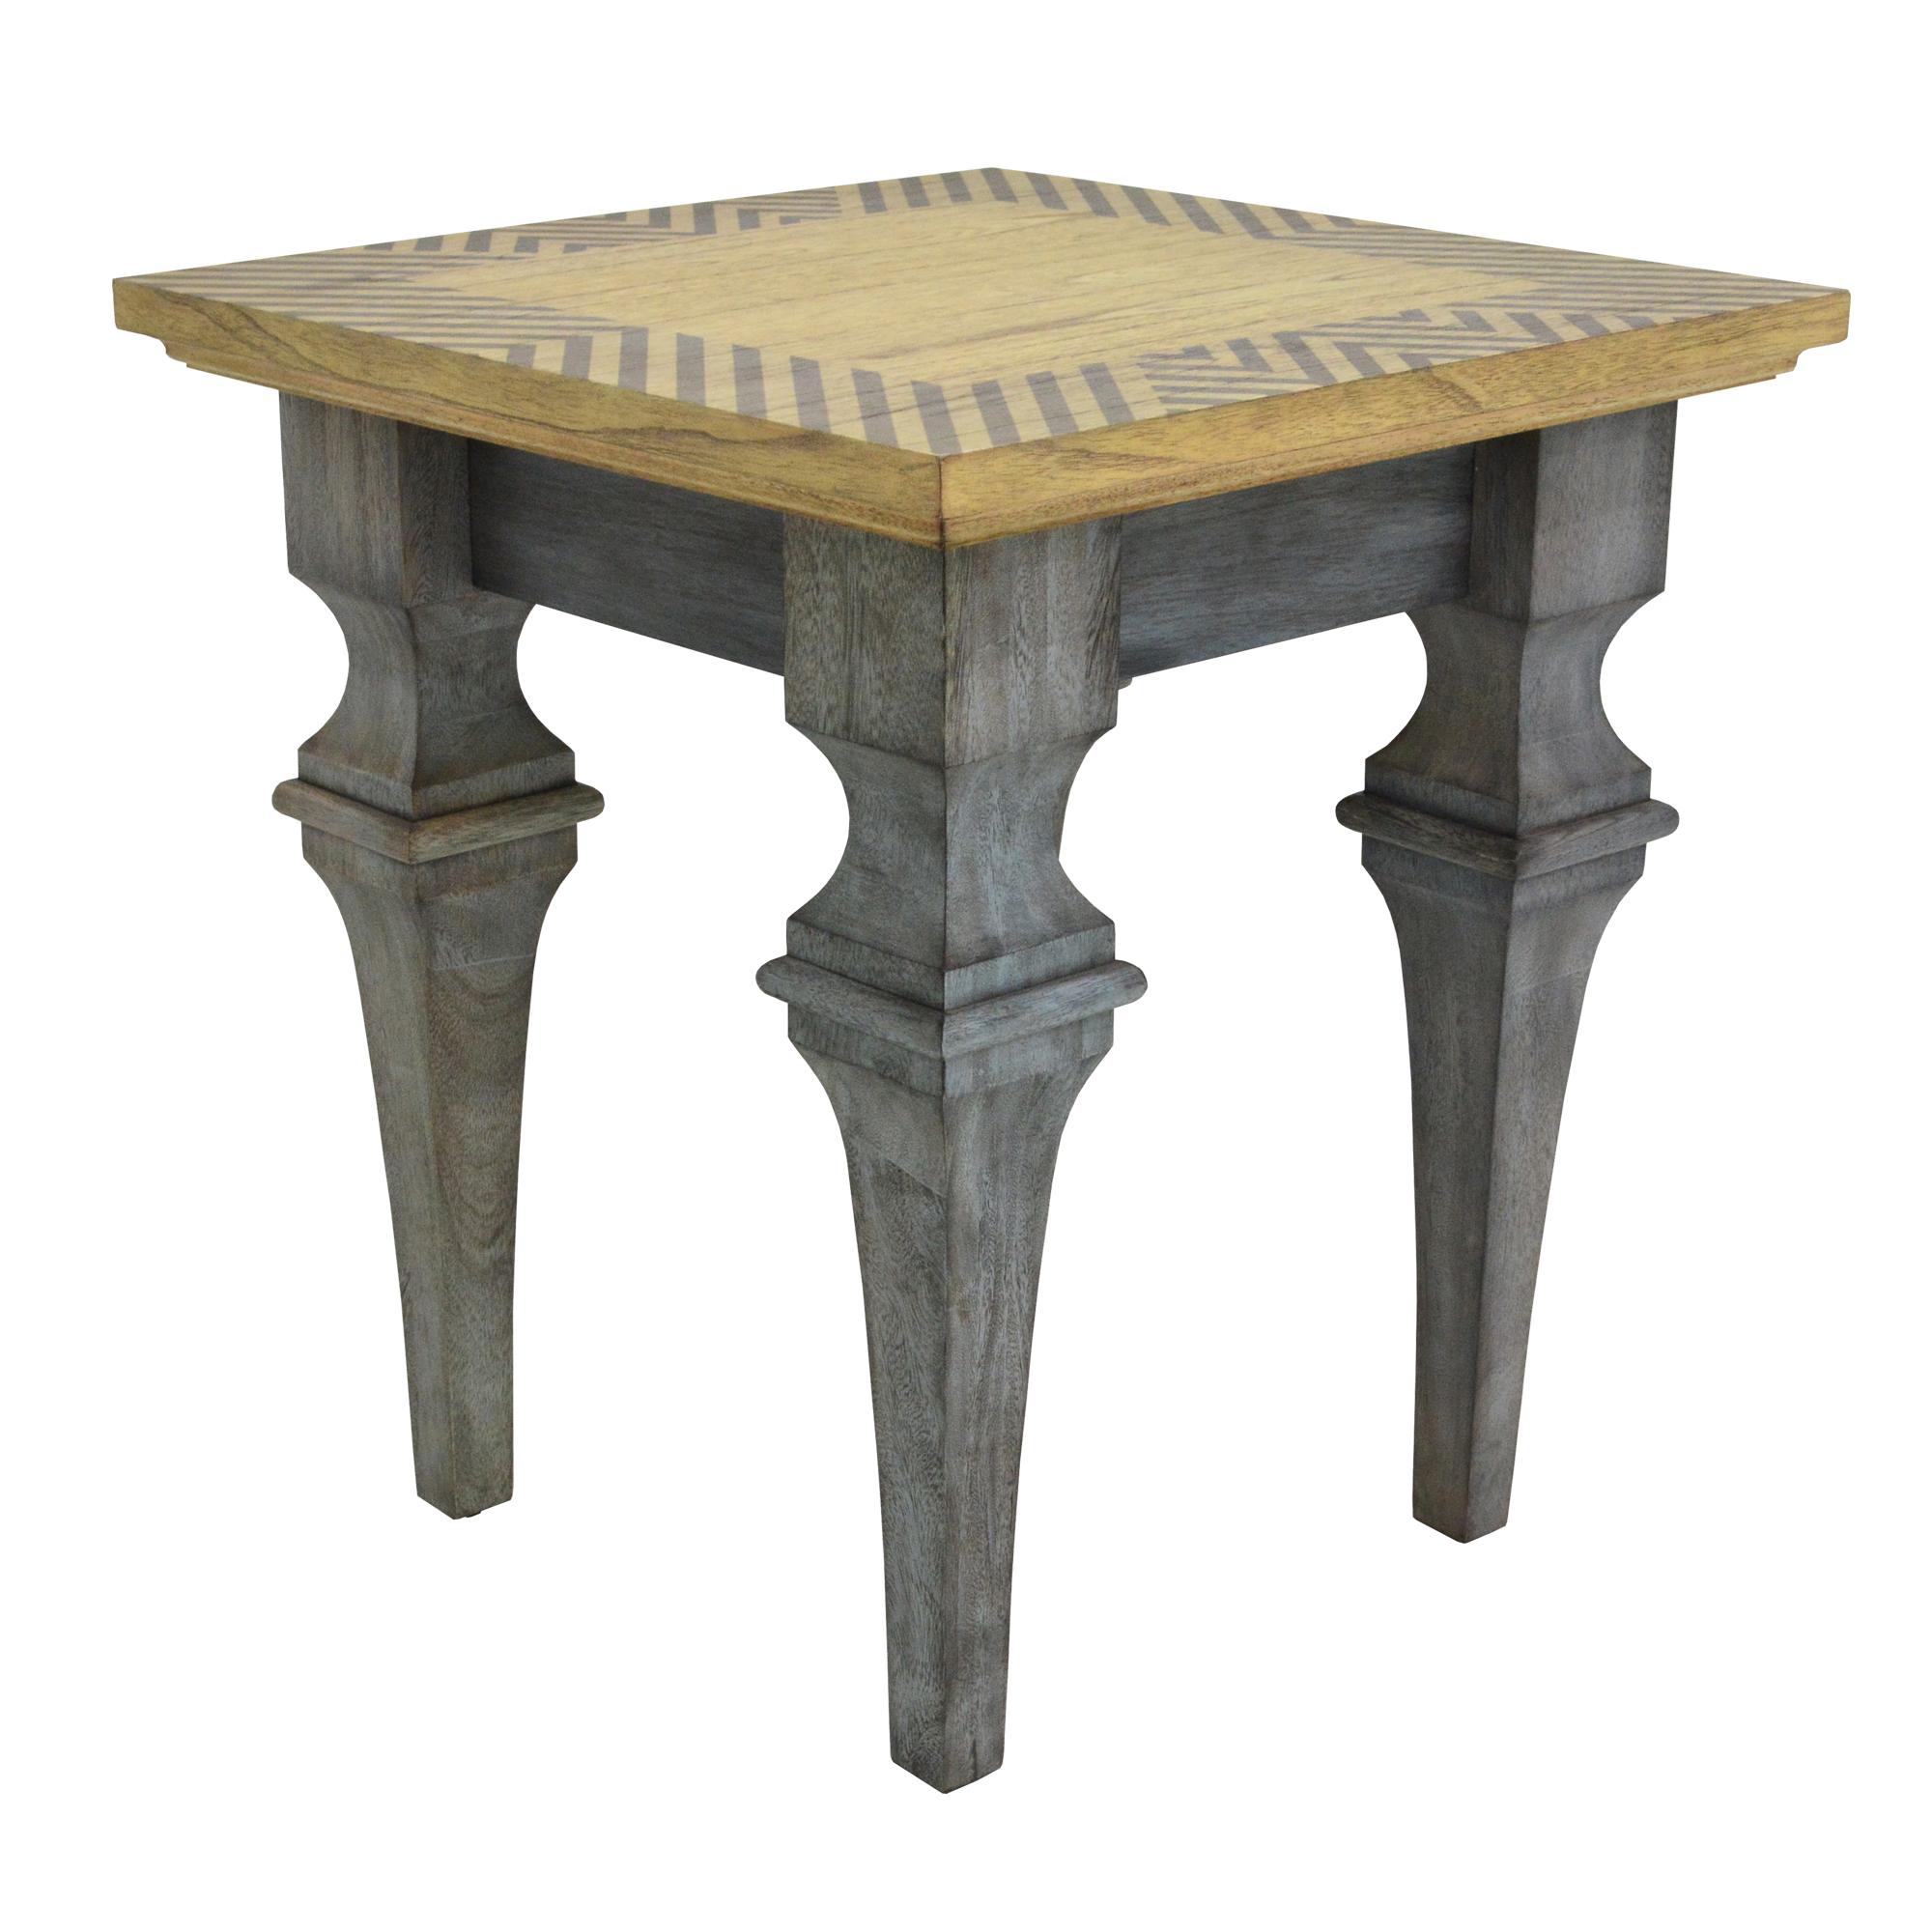 patina vie rue montmartre accent table fifth dsc gray click enlarge outdoor battery lamps bar height cocktail round brass matching nightstands red wood cloths fold away desk